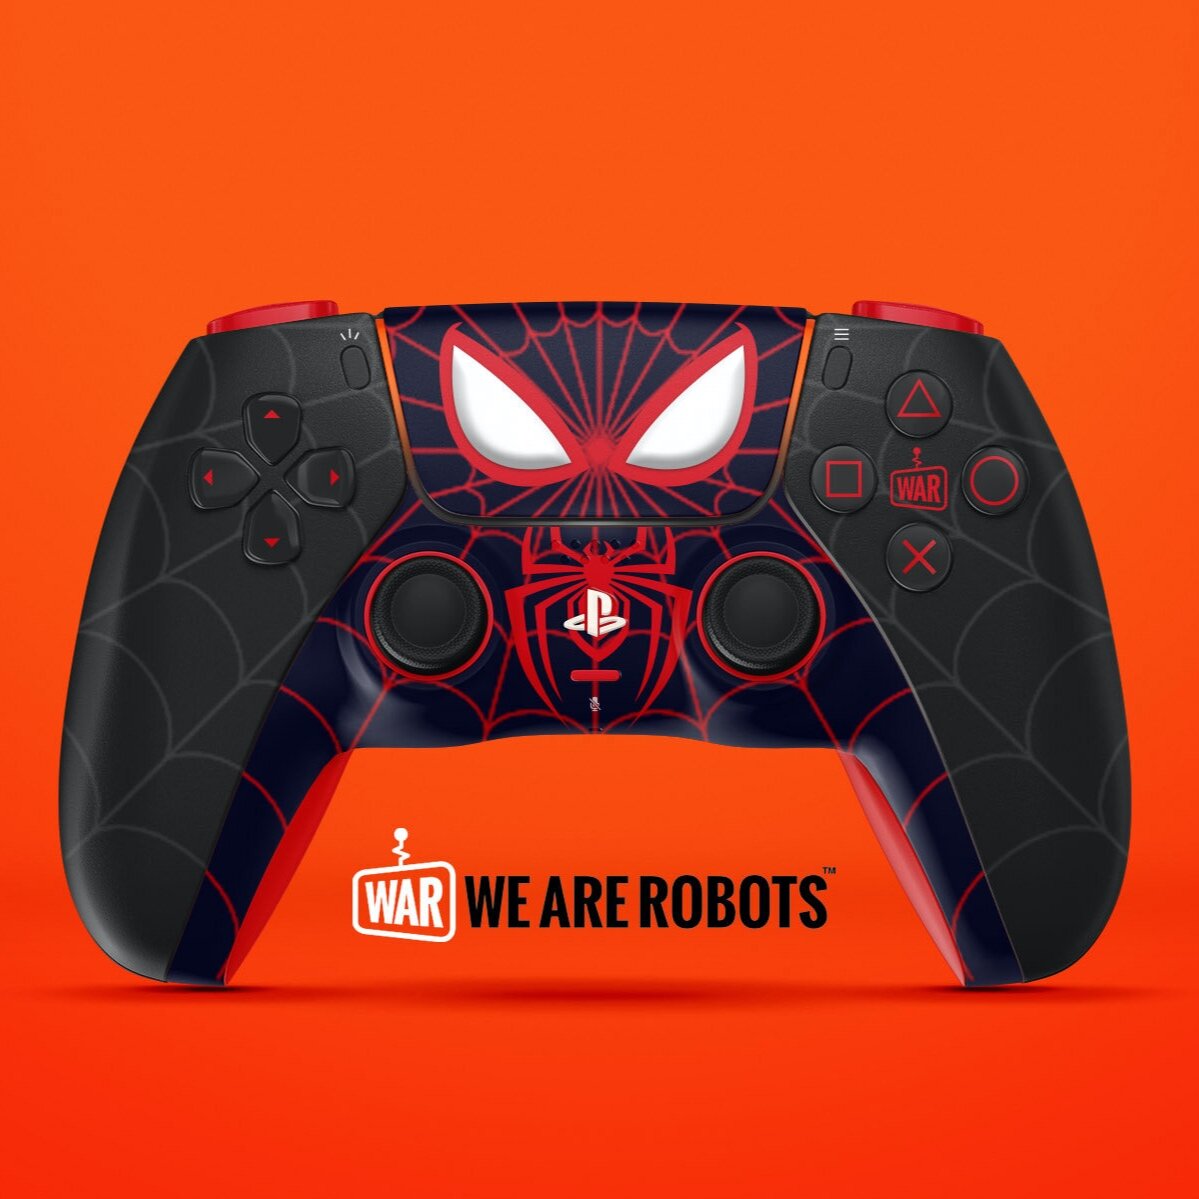 We Are Robots - Spiderman Miles Morales Playstation 5 Controller